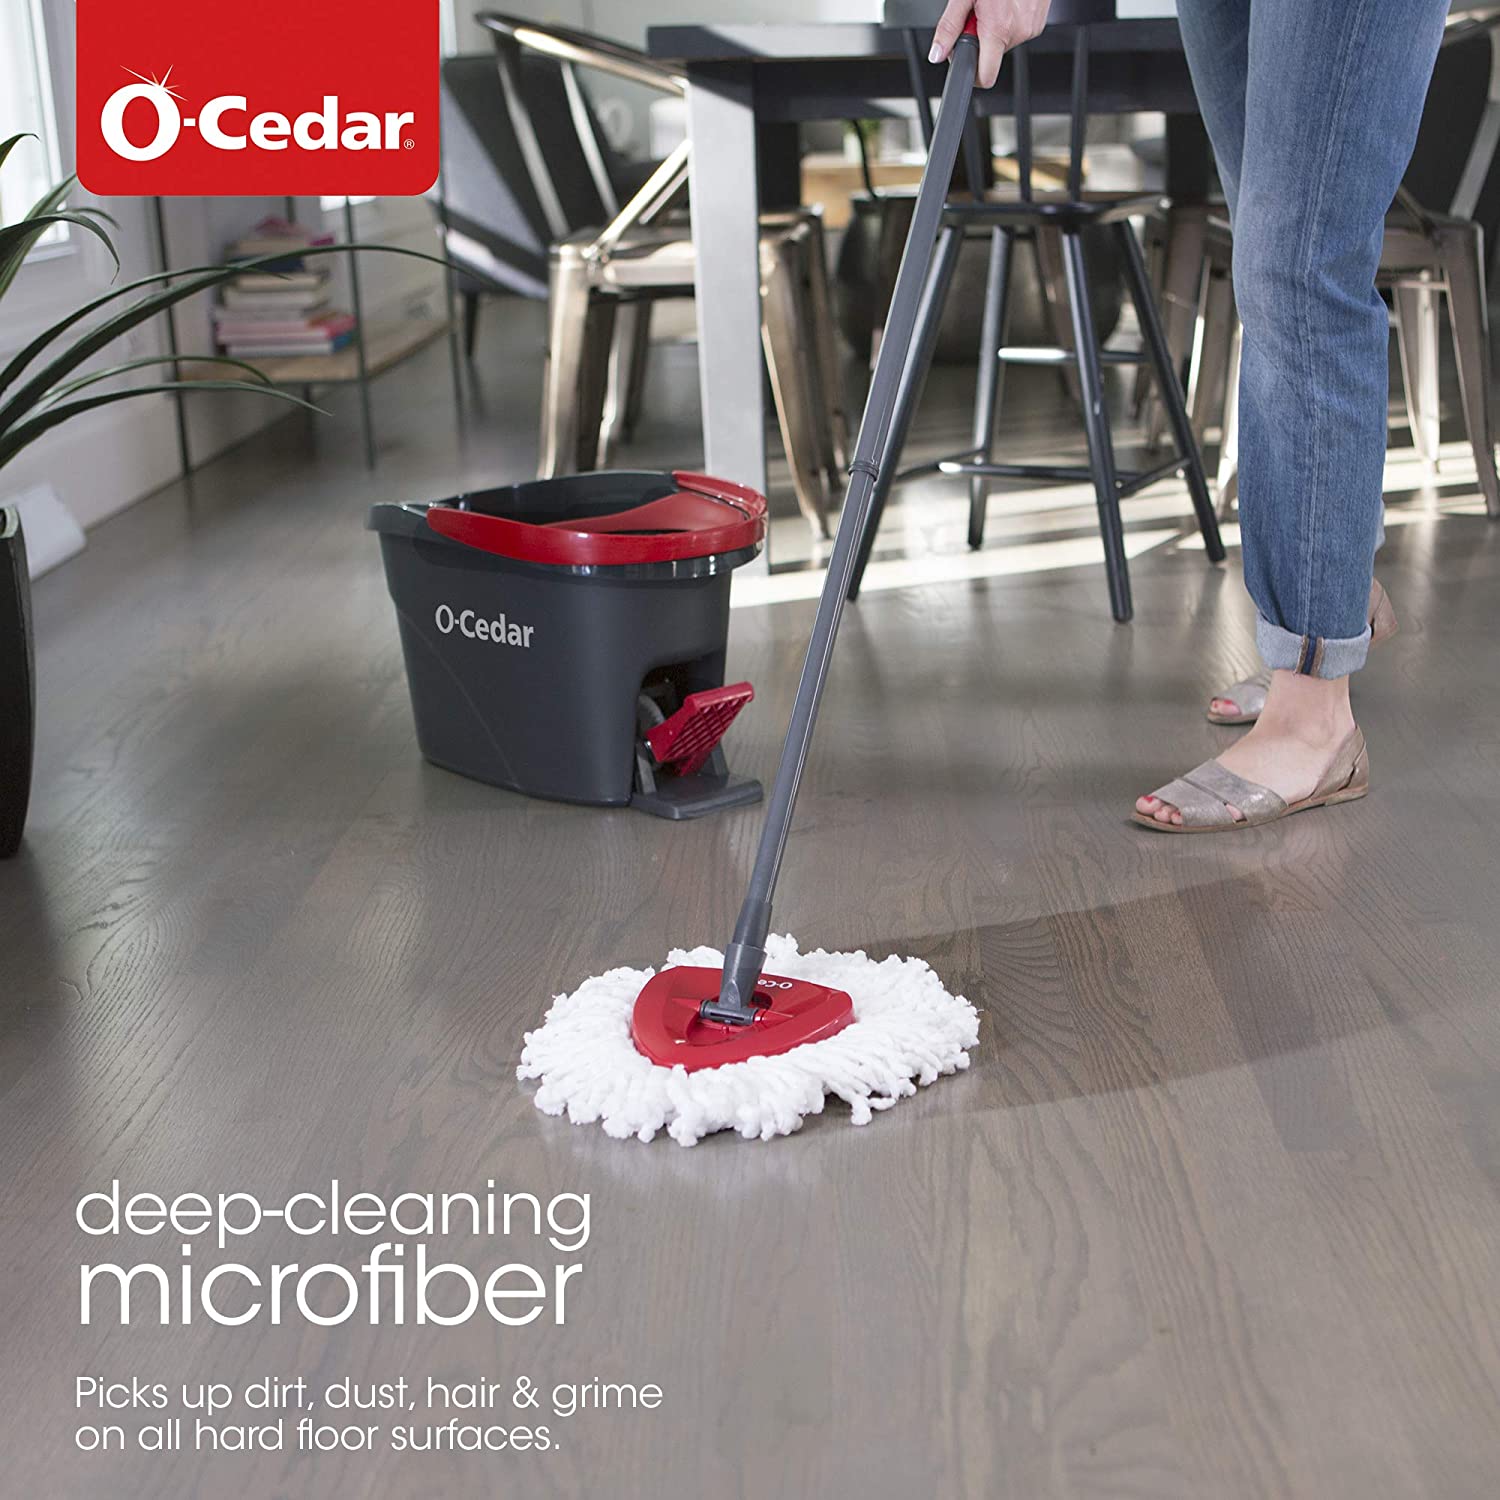 O-Cedar EasyWring Microfiber Spin Mop & Bucket Floor Cleaning System + 2 Extra Refills, Red:Gray